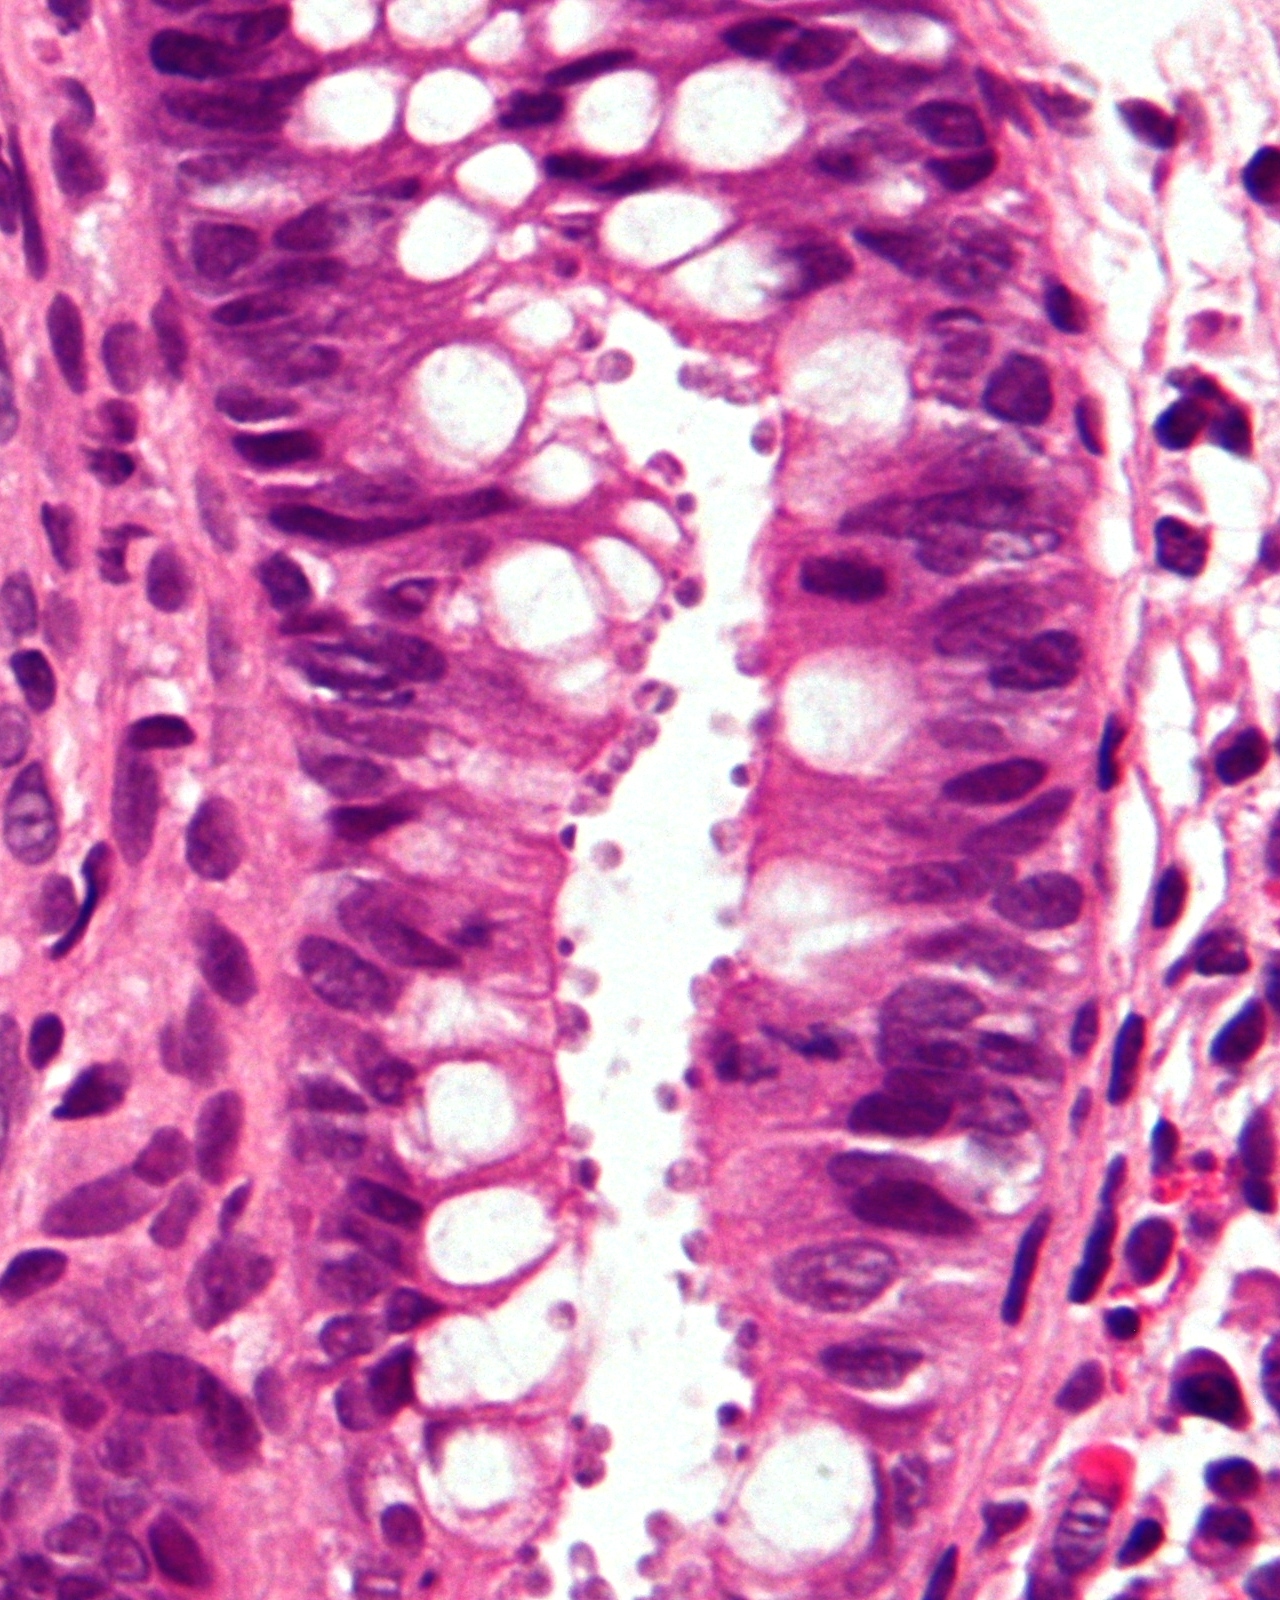 squamous papilloma in the mouth